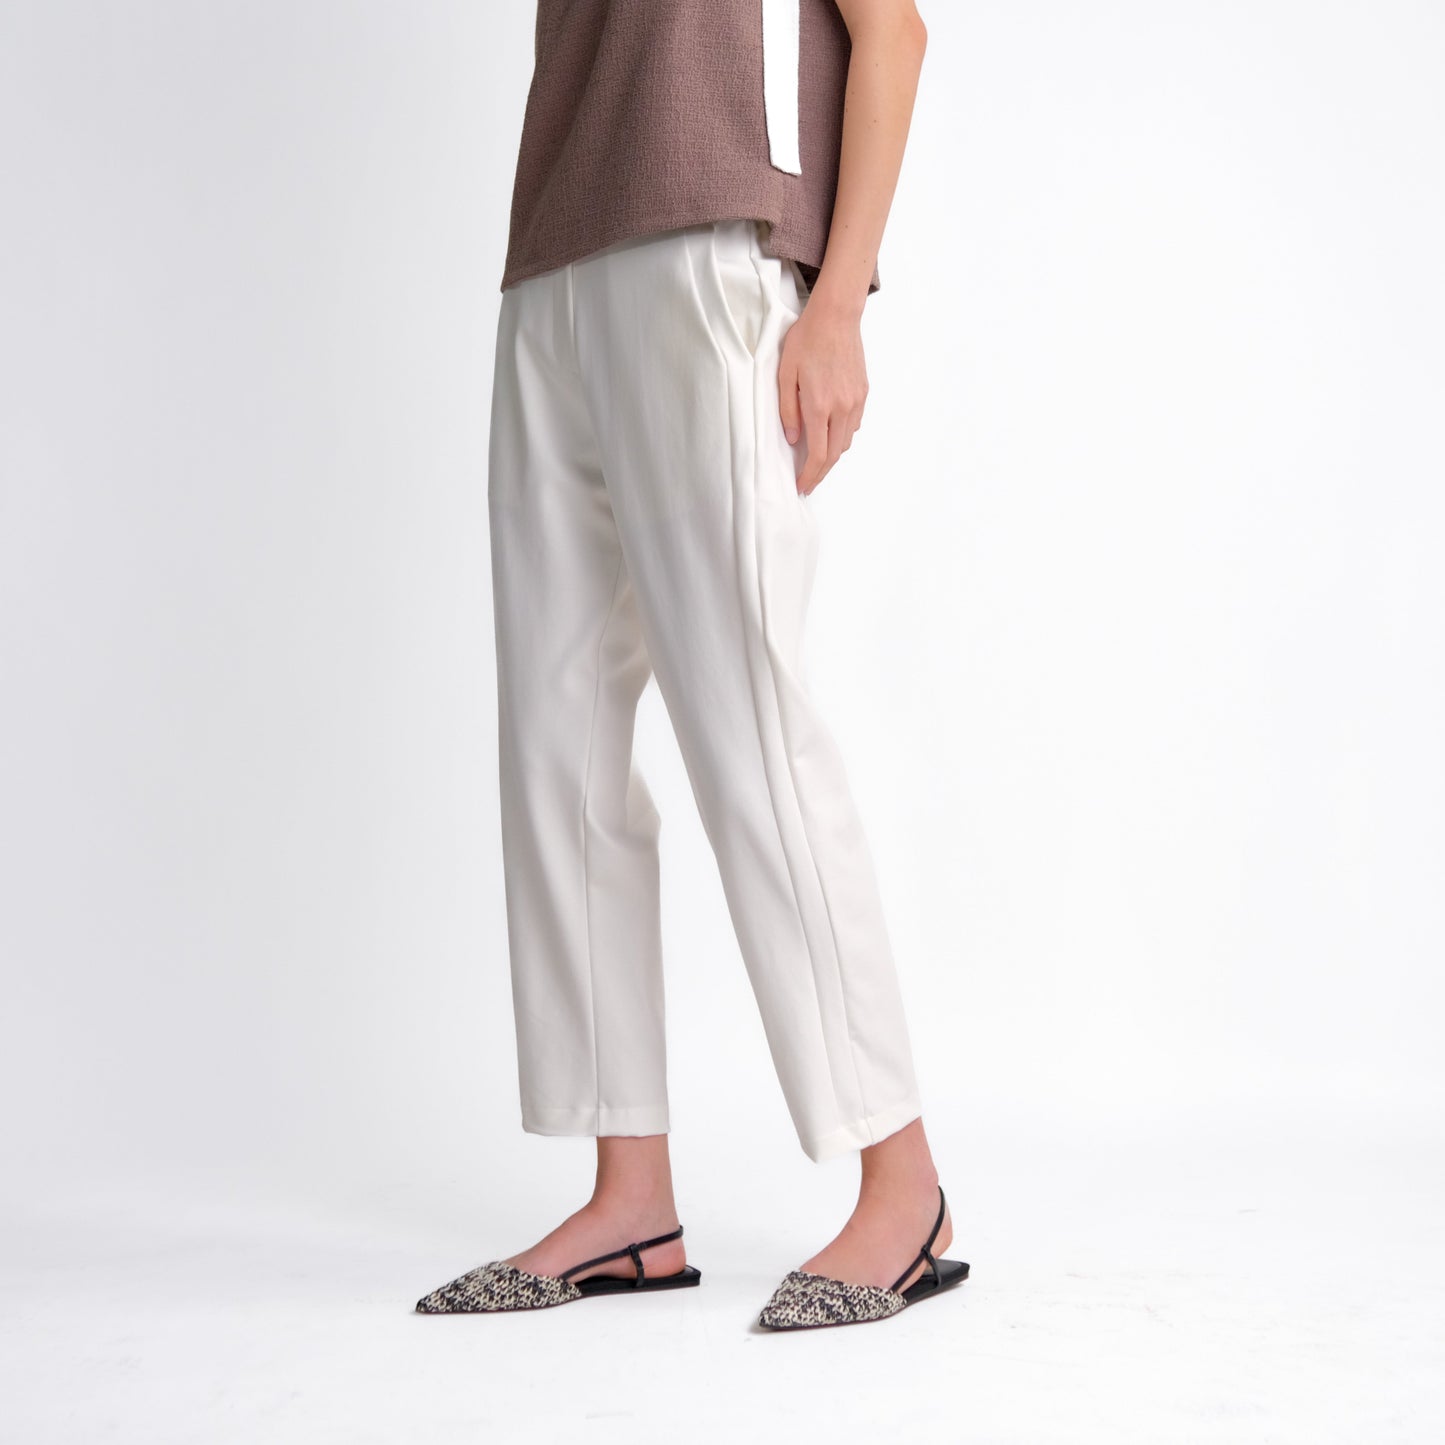 Andrew Smart Ankle Pants